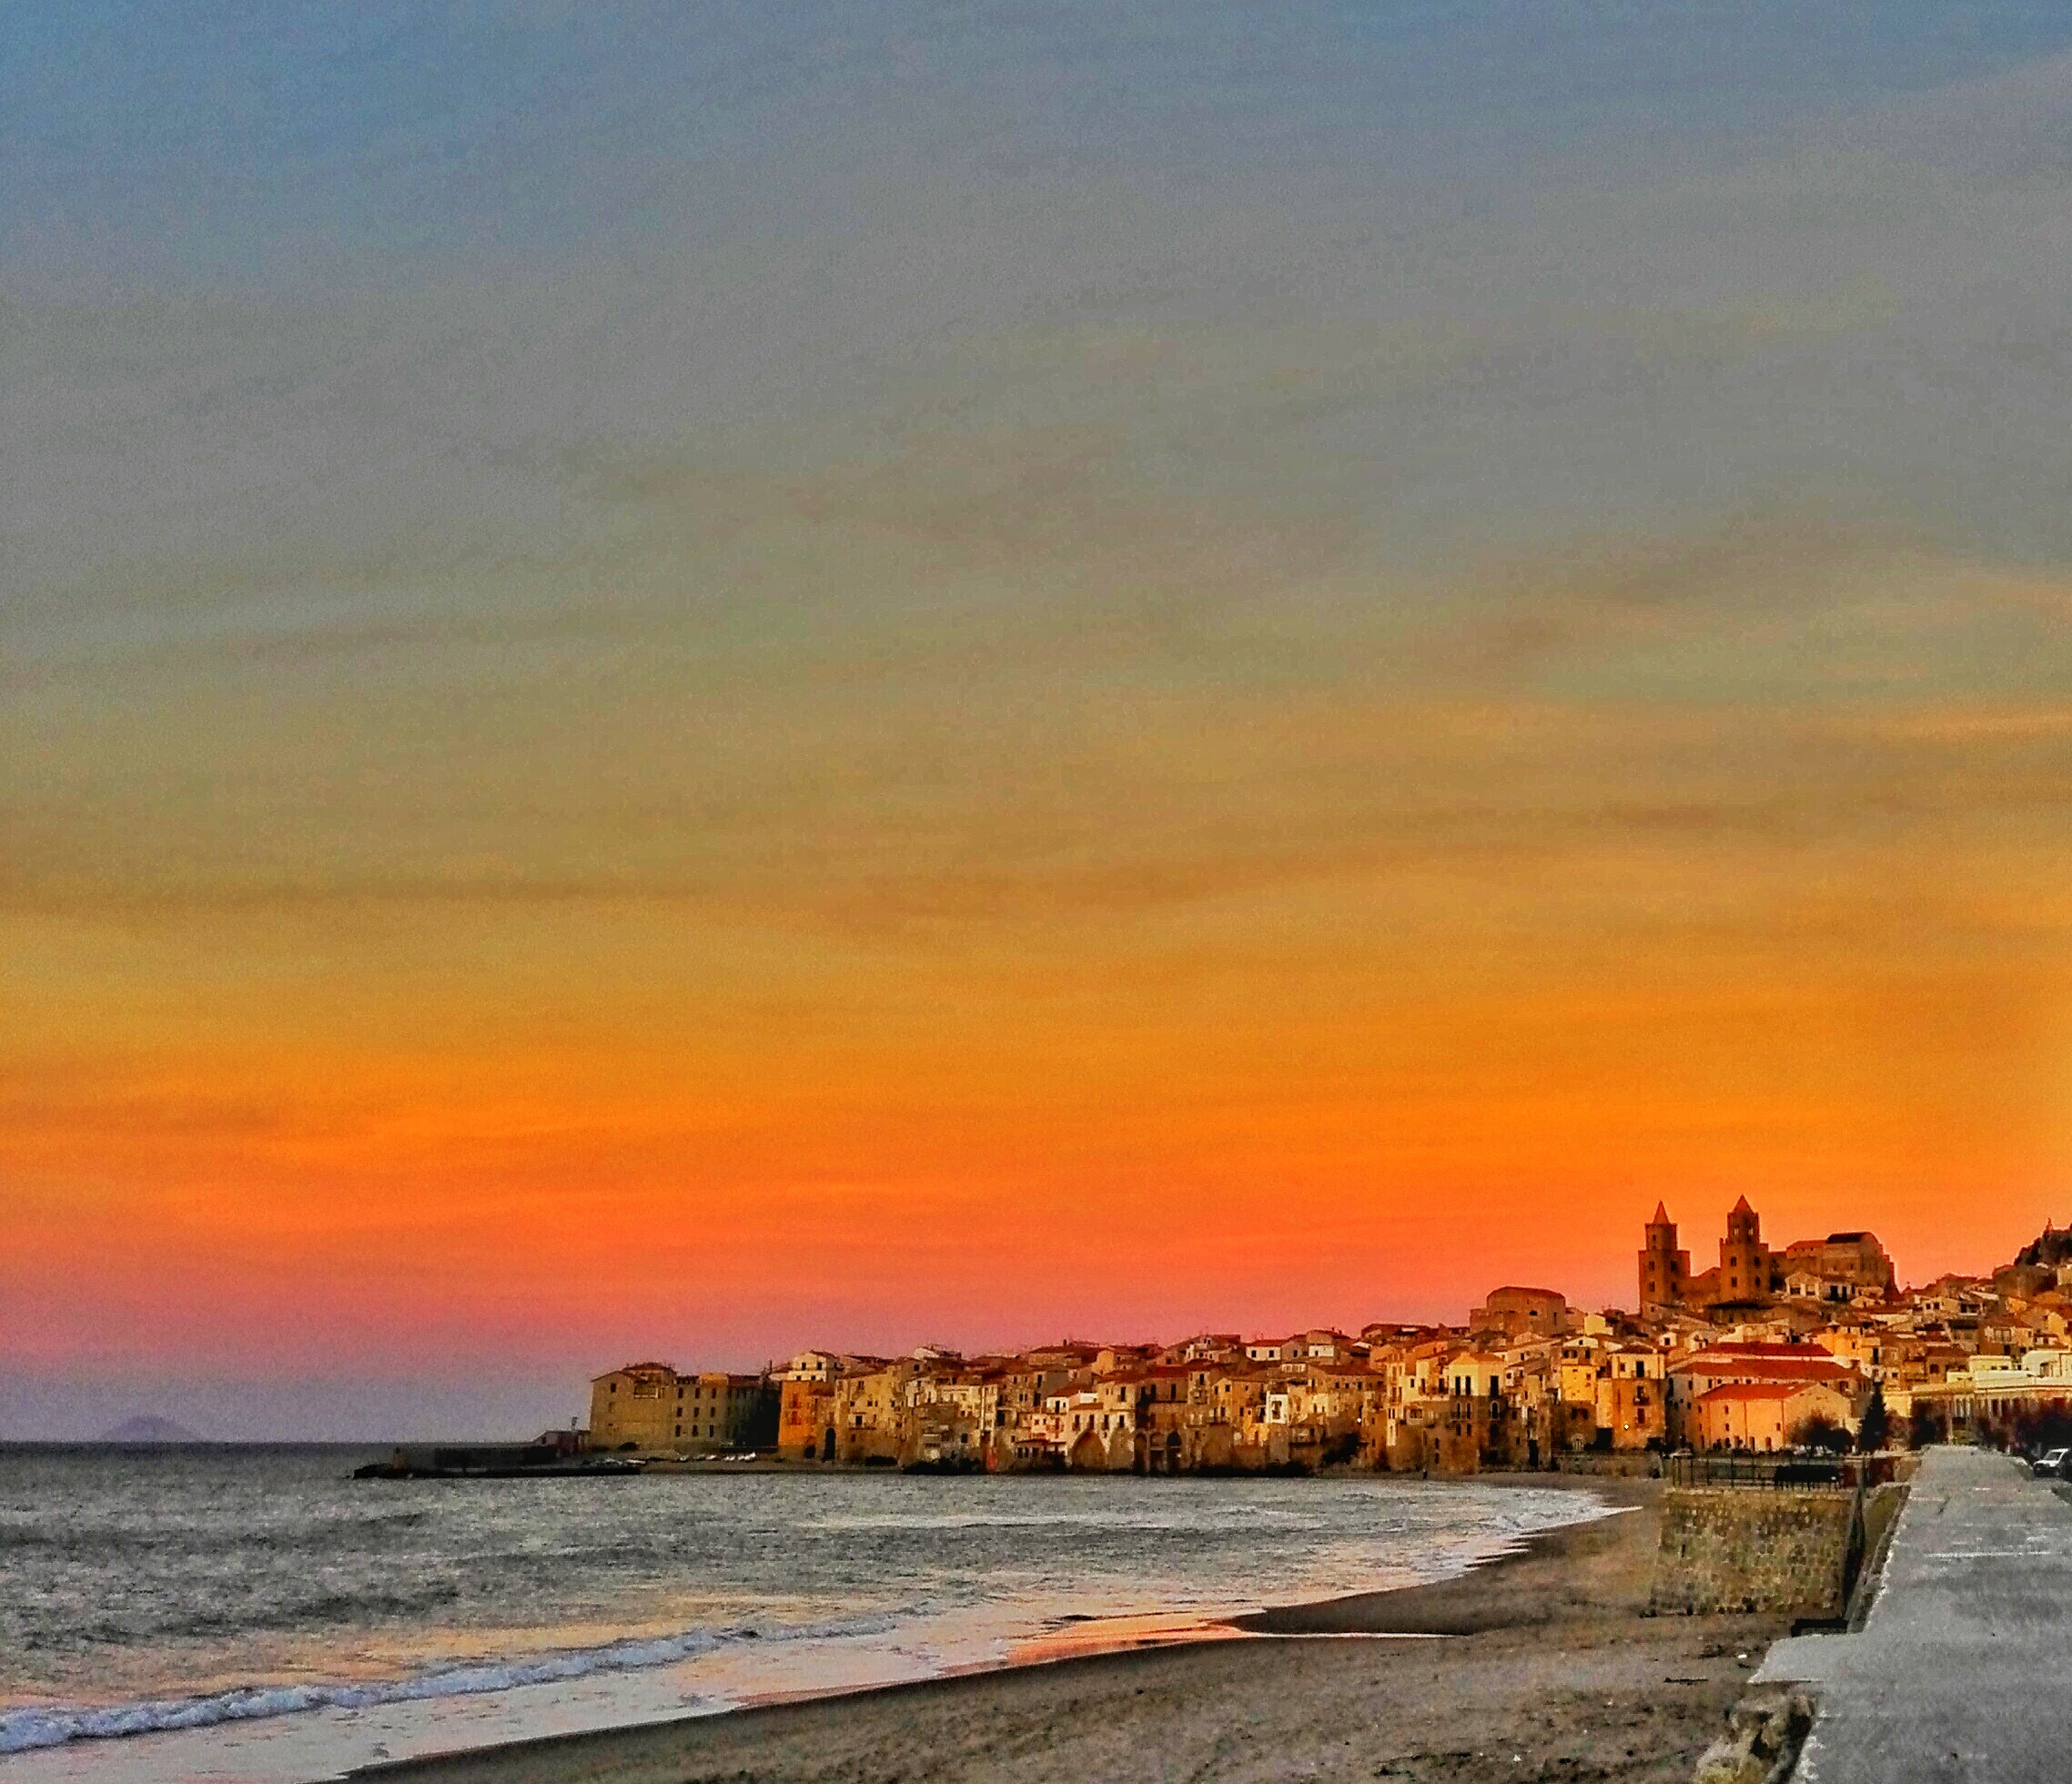 A sunset in Cefalù